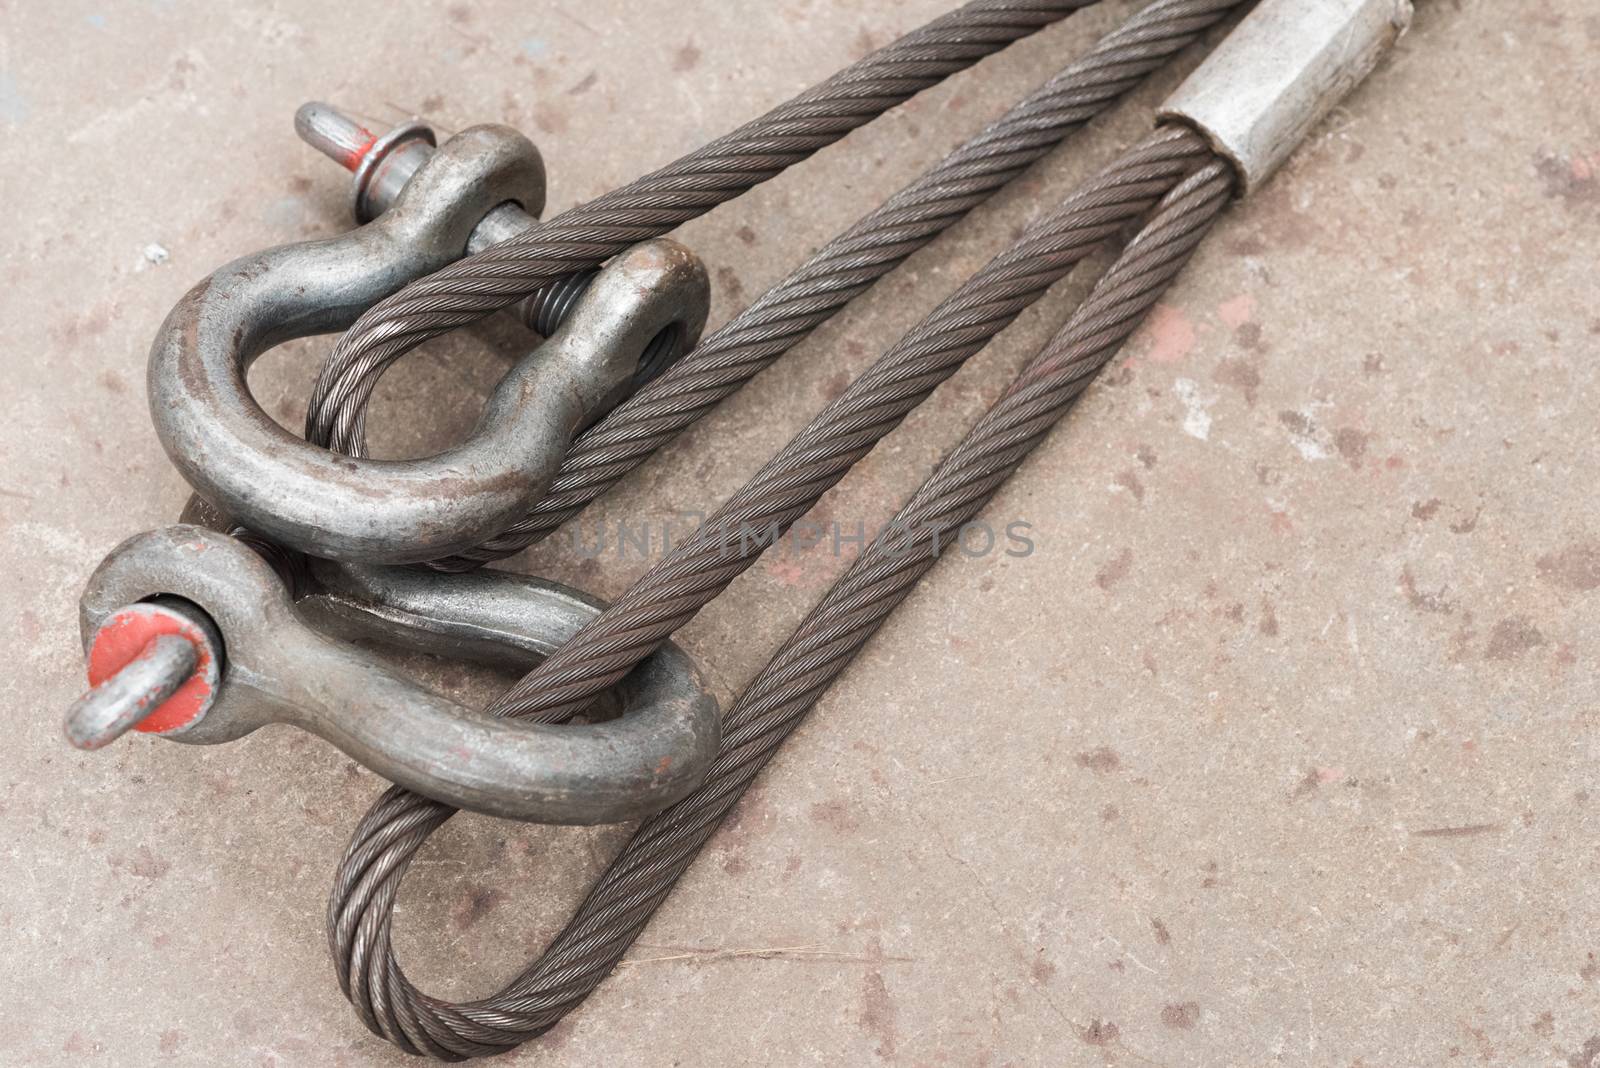 Two used steel wire loops on a concrete floor with one shackle through each.